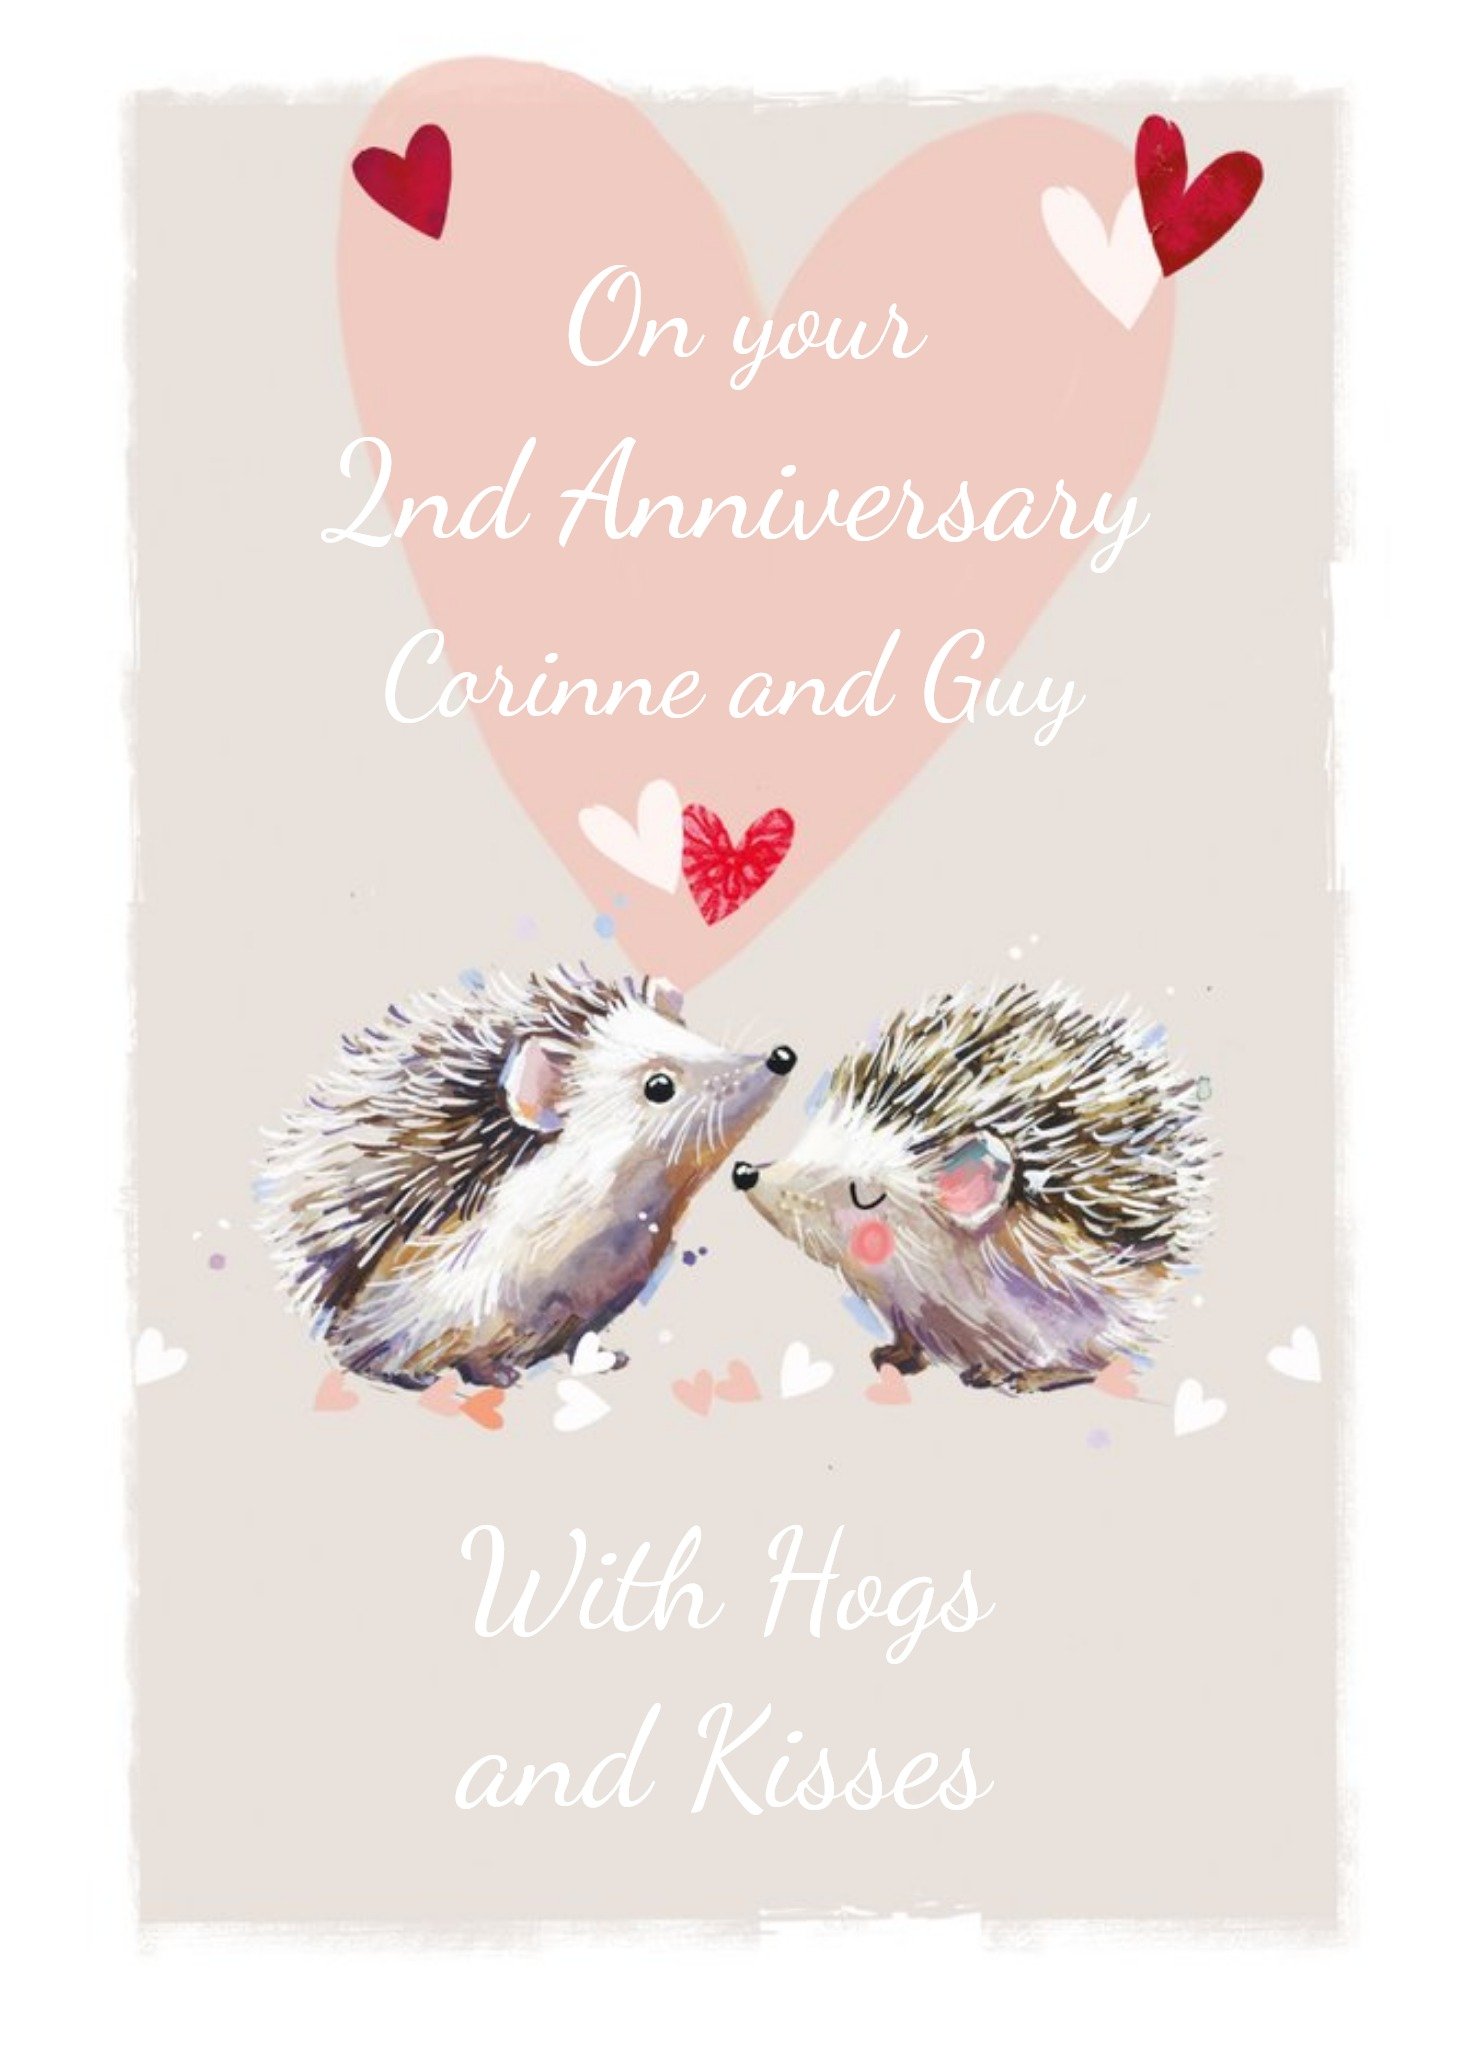 Ling Design Hogs And Kisses Hedgehogs 2nd Anniversary Card, Large